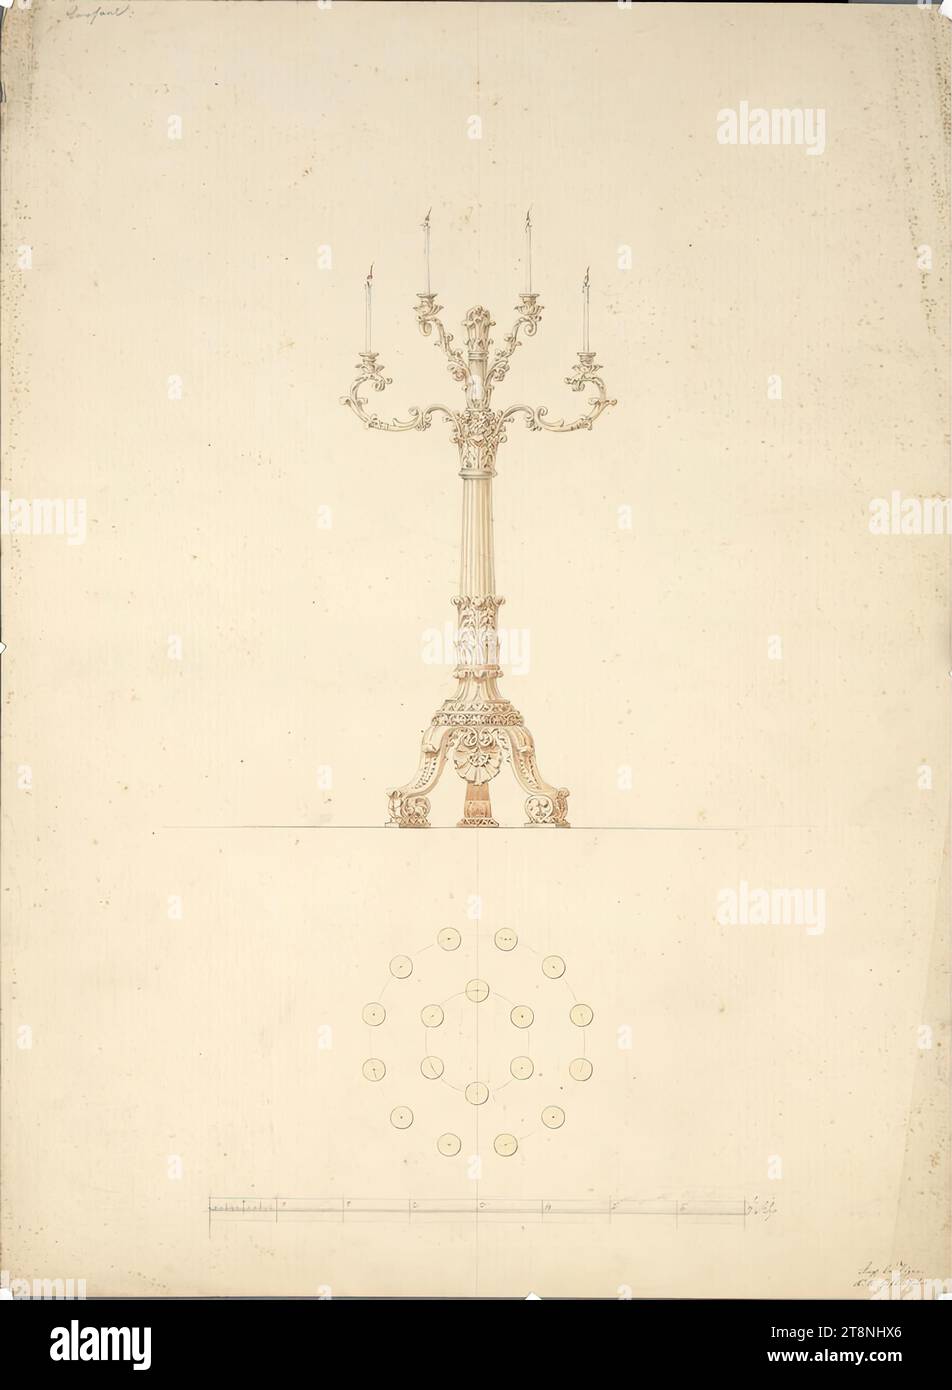 Vienna I, Hofburg, furnishings, candelabra, ground plan, elevation, 1st half of the 19th century, architectural drawing, graphite; gold-colored and gray wash, sheet: 49.9 x 36.5 cm Stock Photo